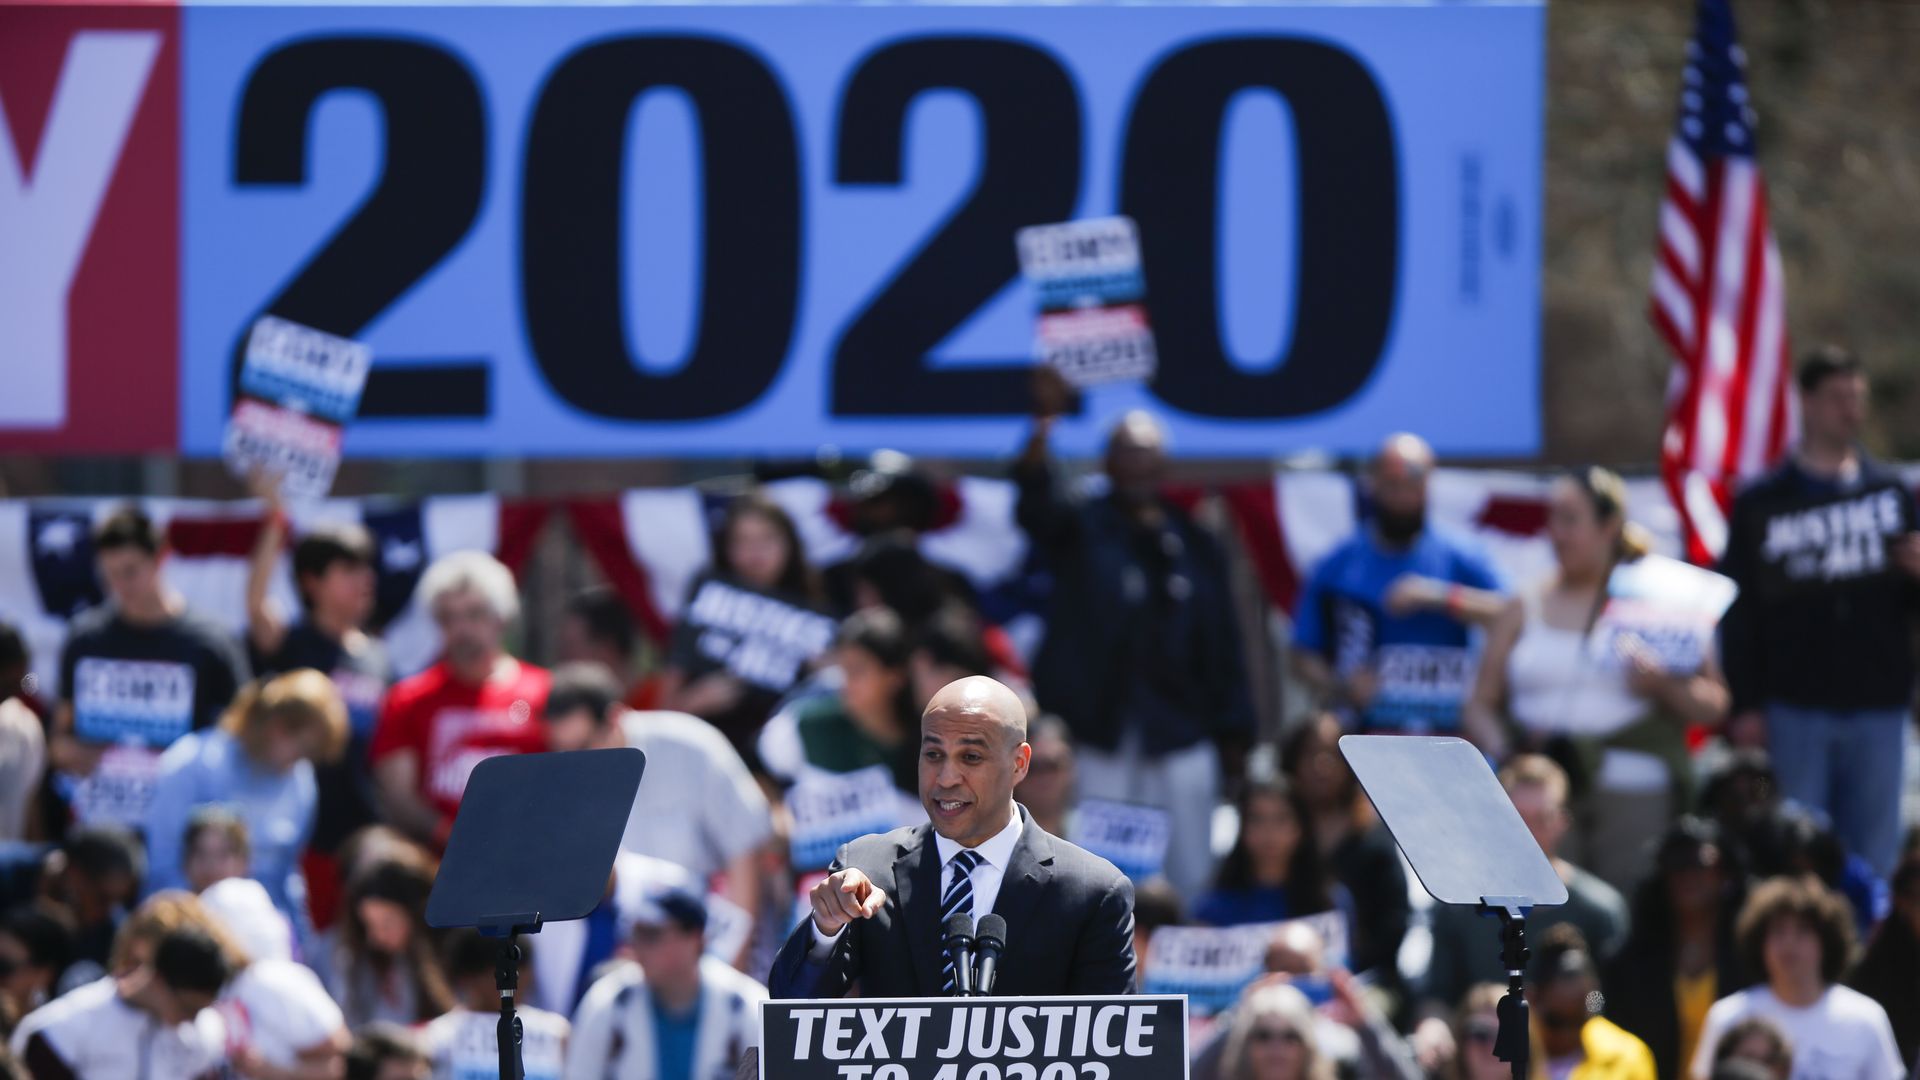 Cory Booker launches his 2020 campaign in Newark.